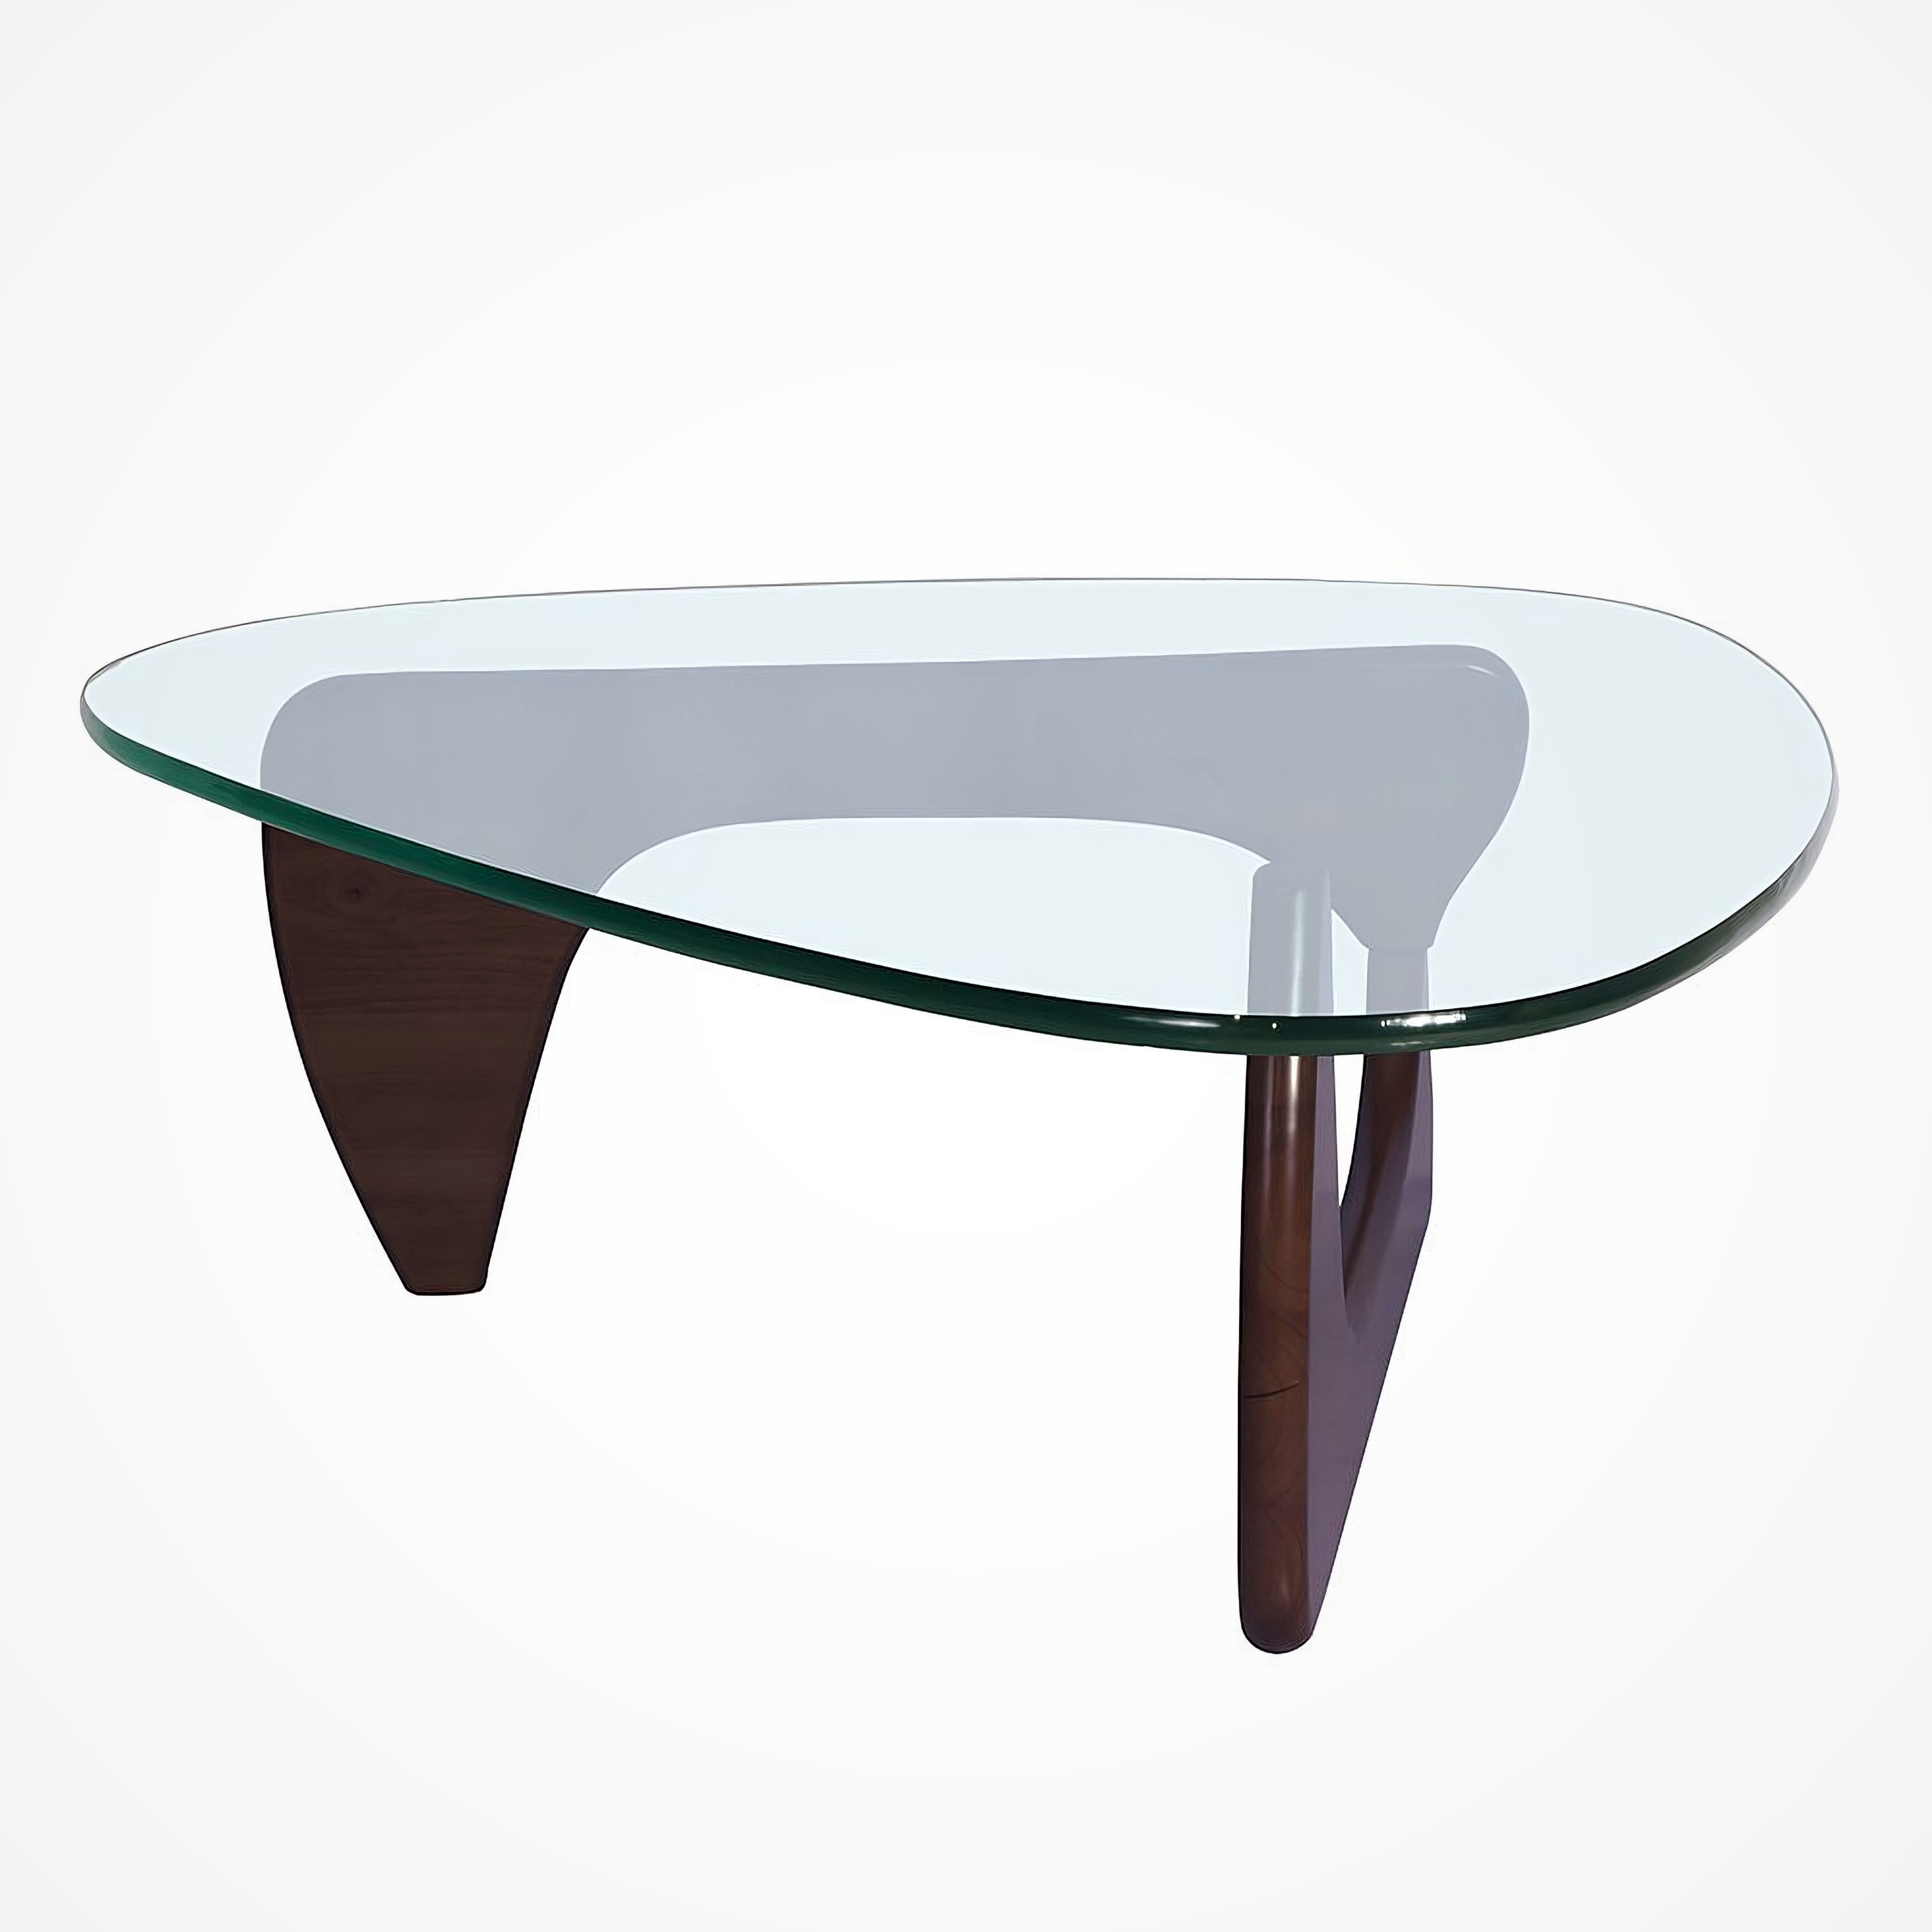 Isamu Noguchi Table, Wood and Tempered Glass